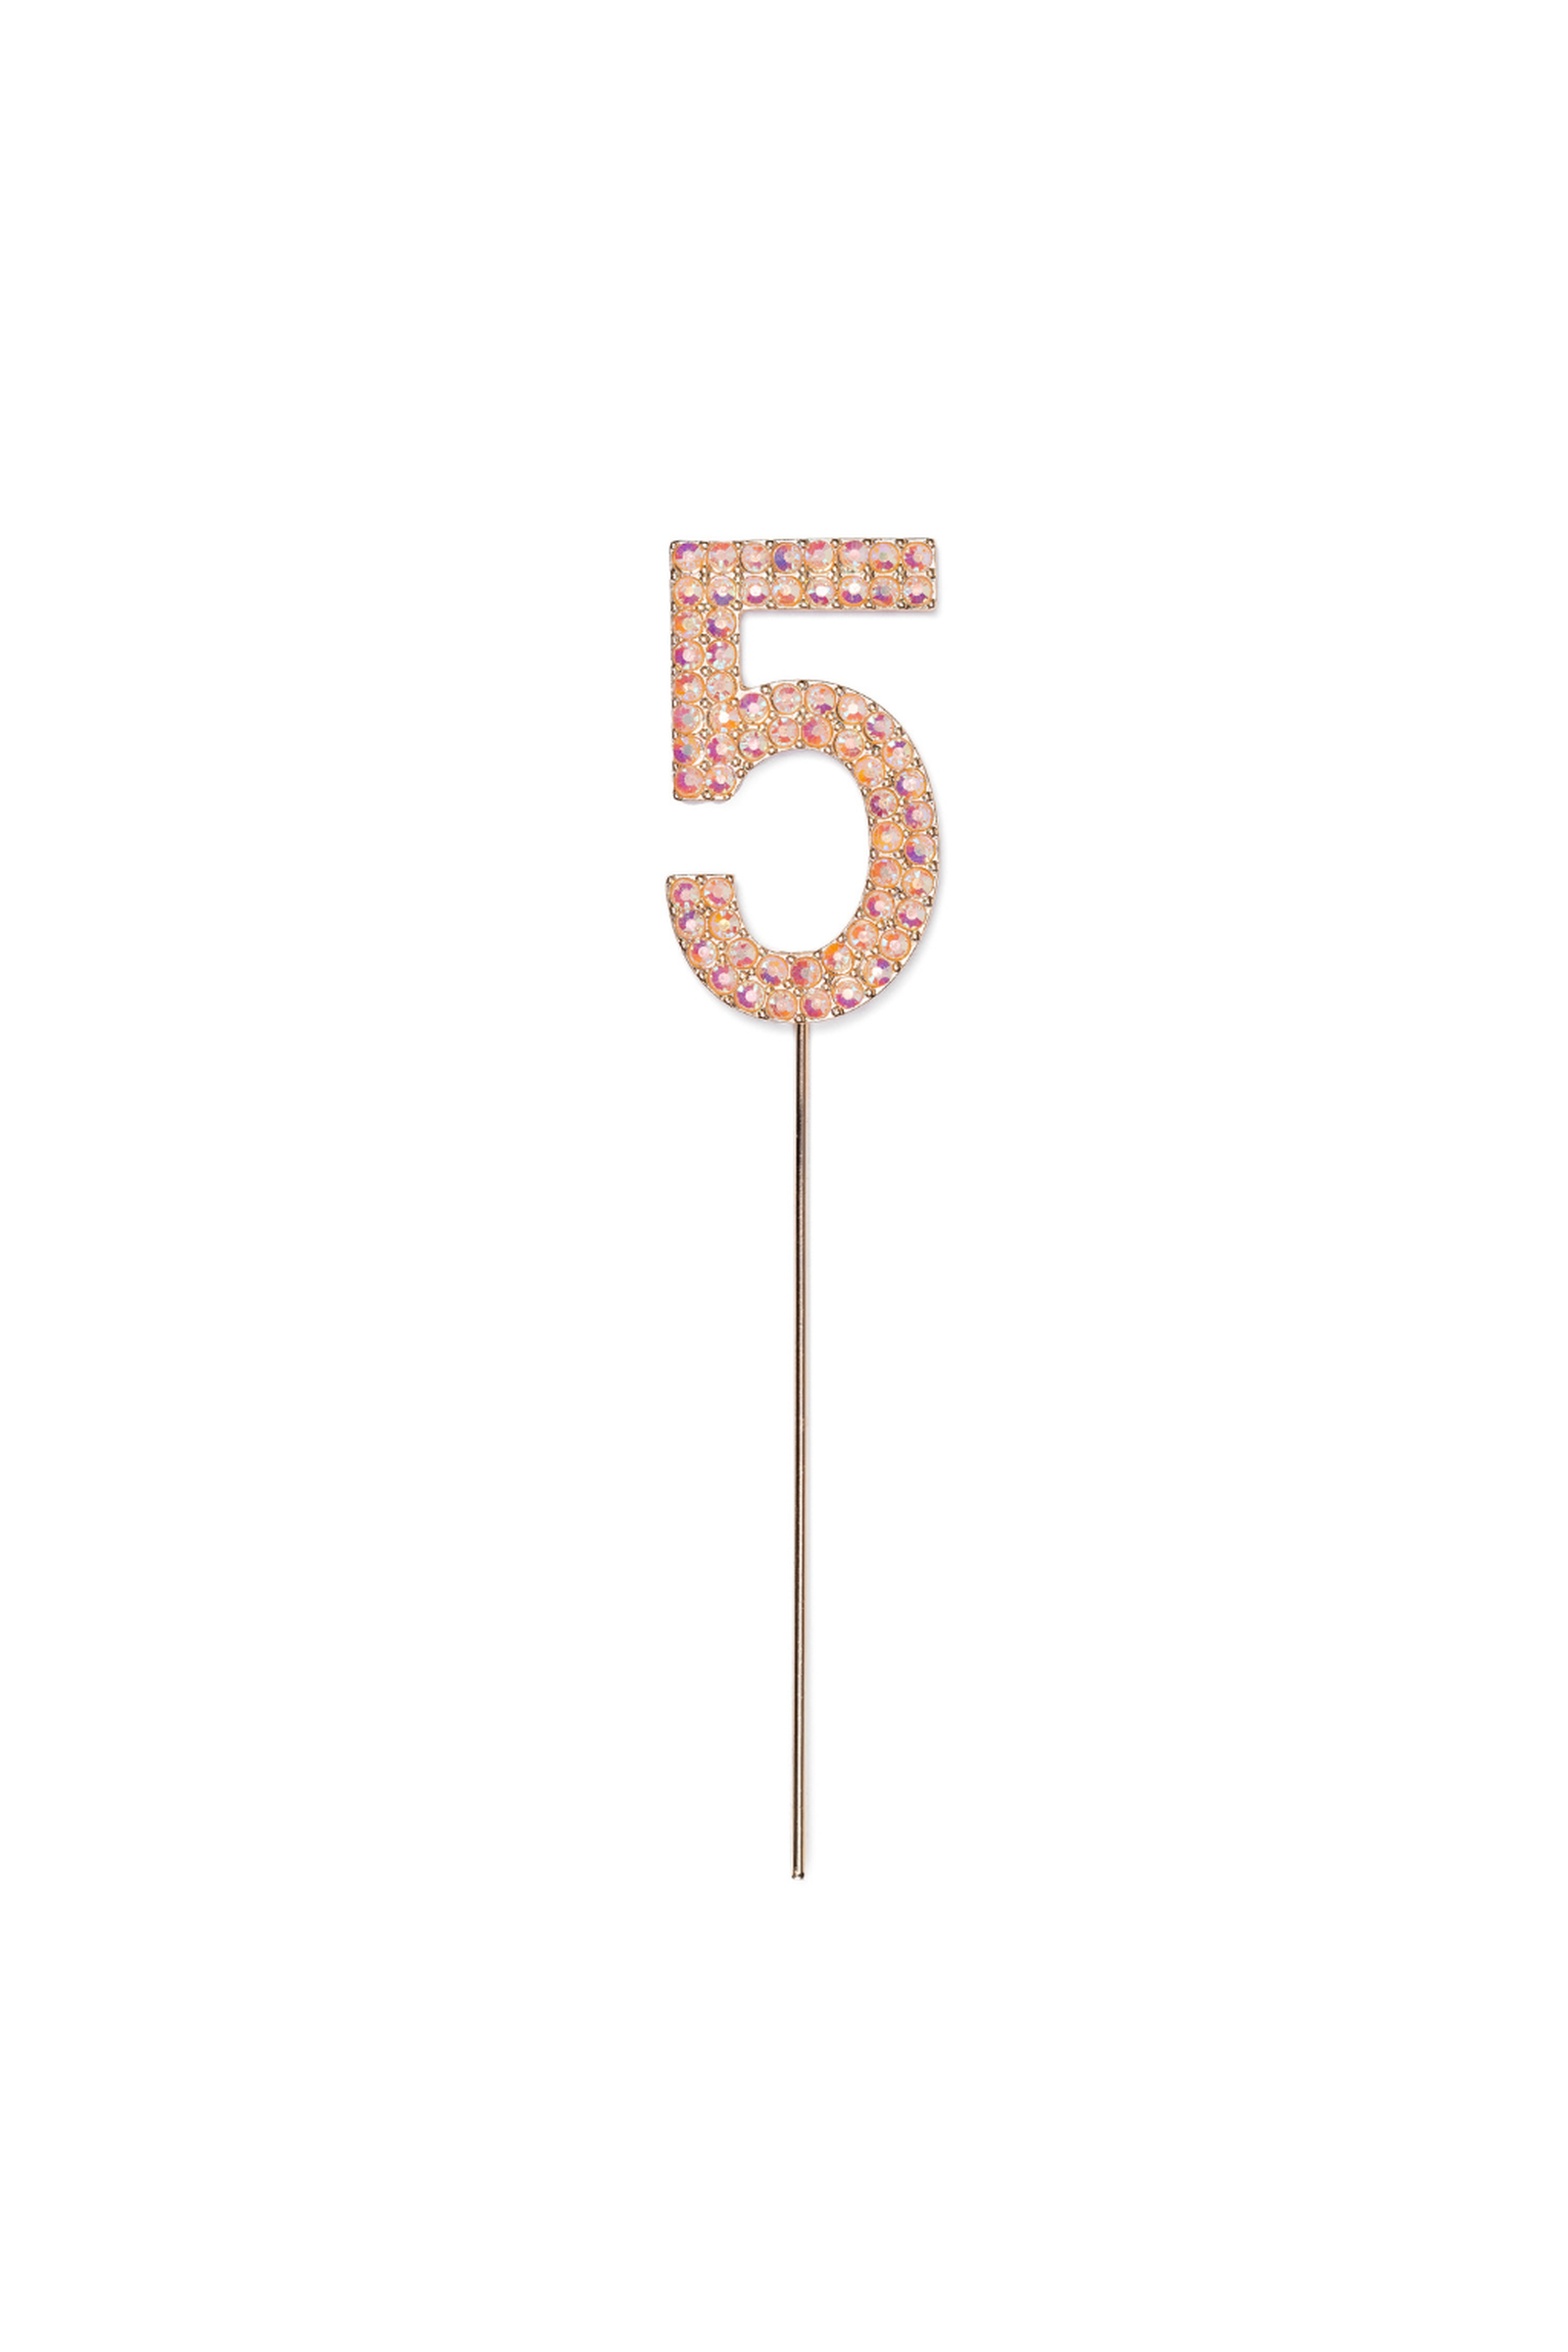 Pink Rhinestone Cake Topper Numbers - Party